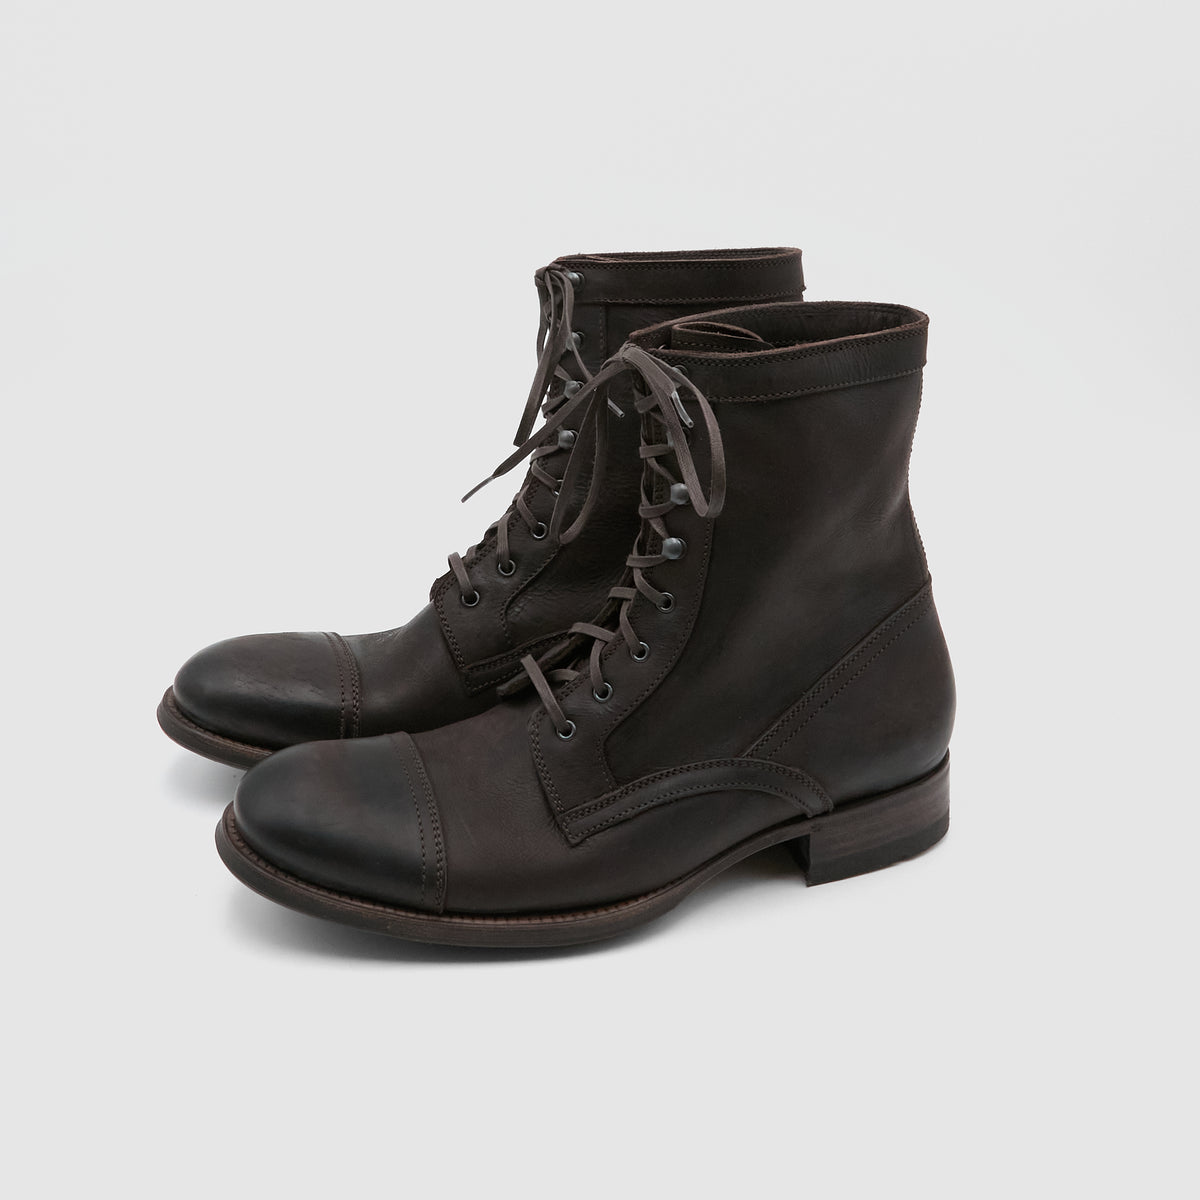 n.d.c. made by hand Lace Up Ankle Boot